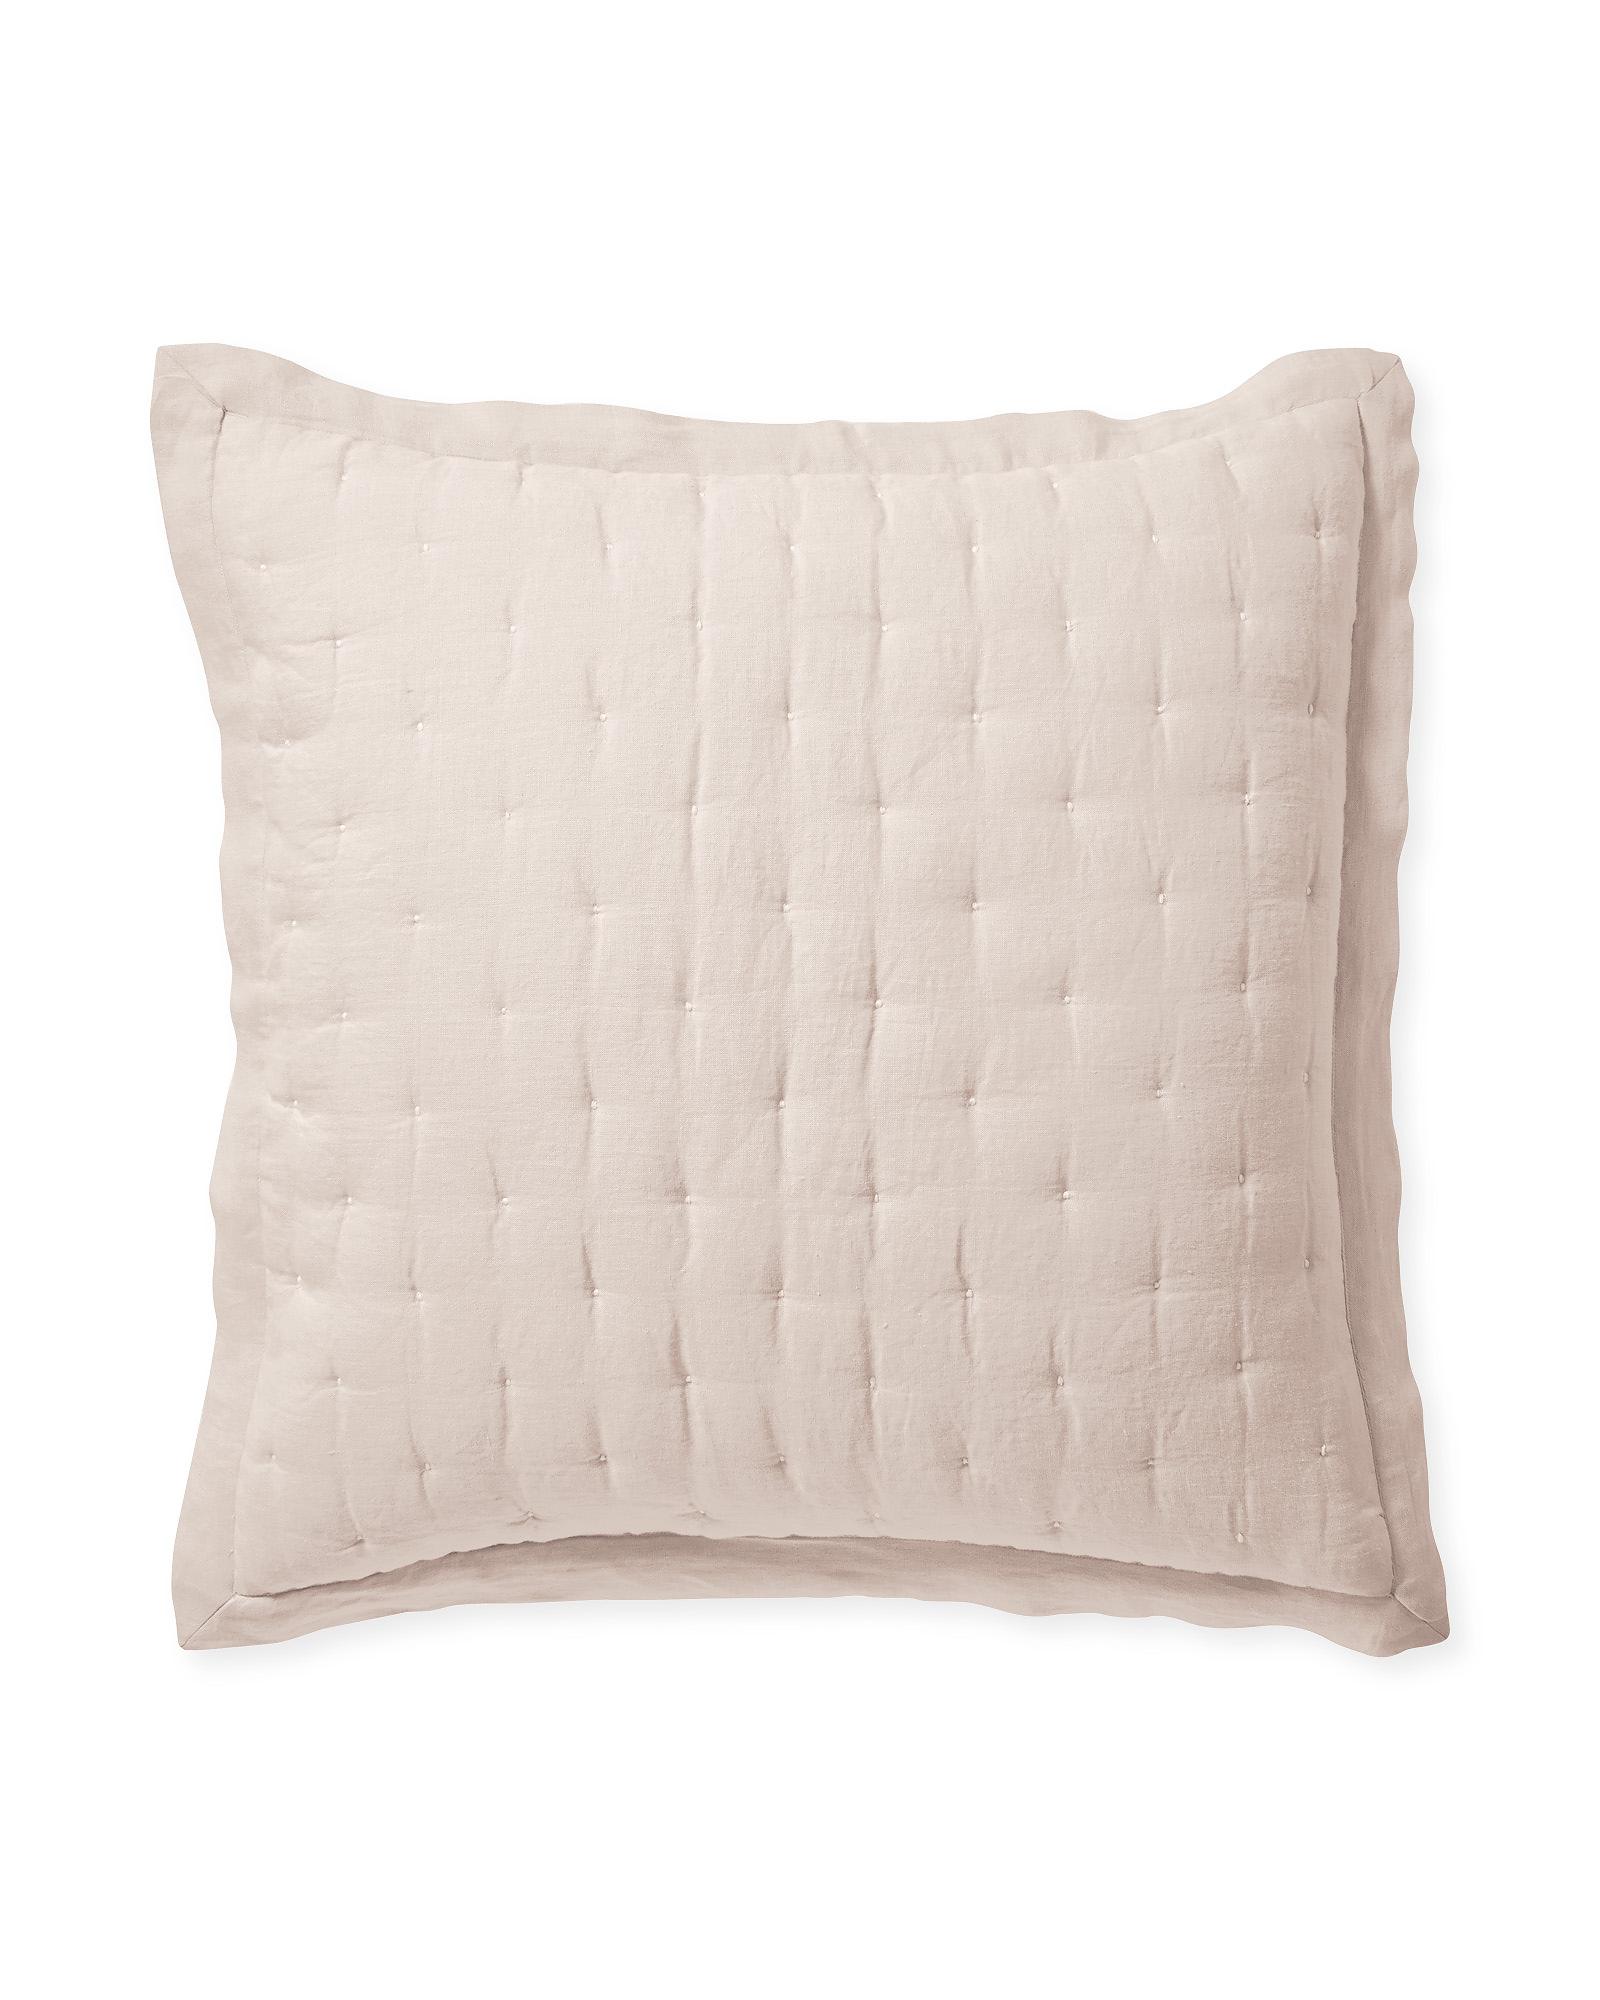 Shop Sutter Linen Sham (SERENA & LILY), Size: Euro, Color: Pink Sand, Quantity: 2 from Serena & Lily on Openhaus